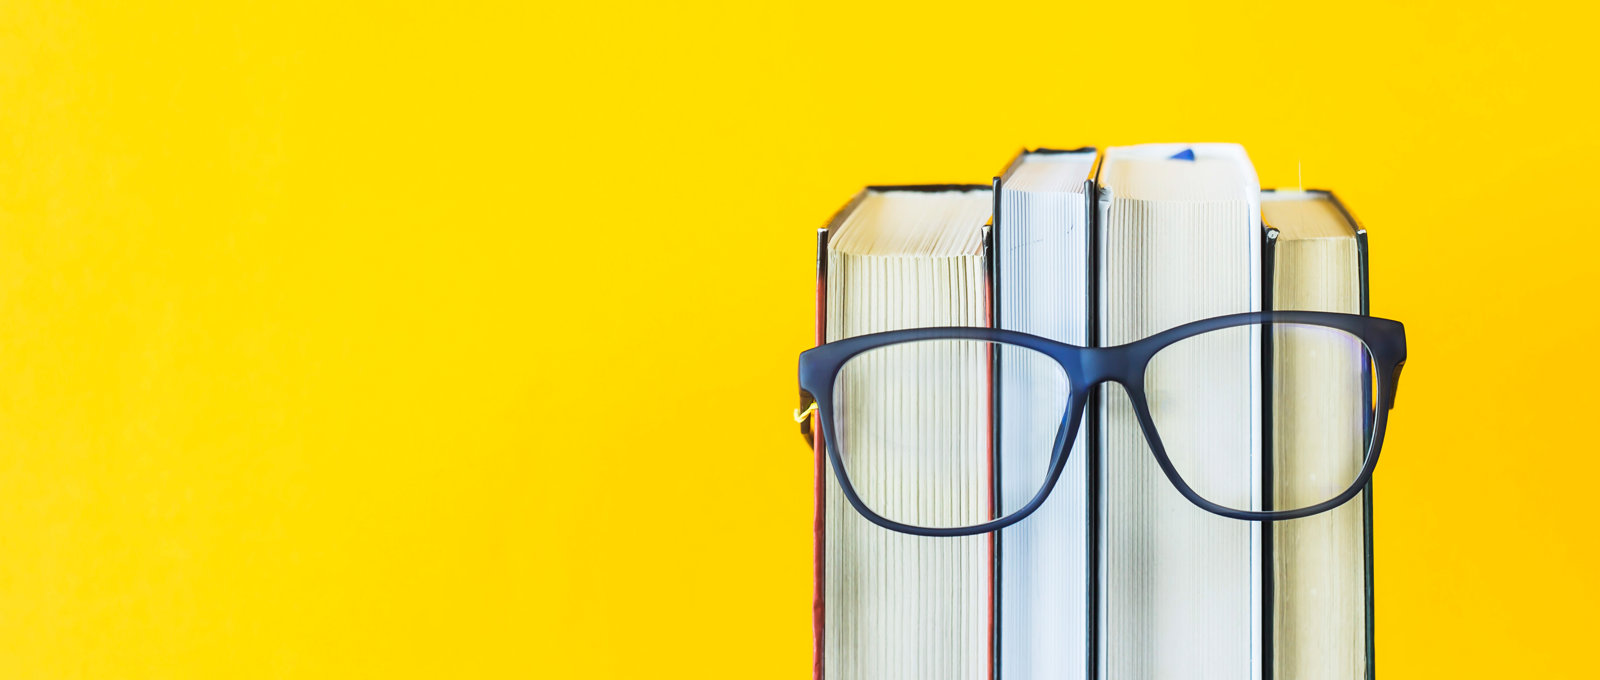 Photo of a pair of glasses resting on some books against a yellow background